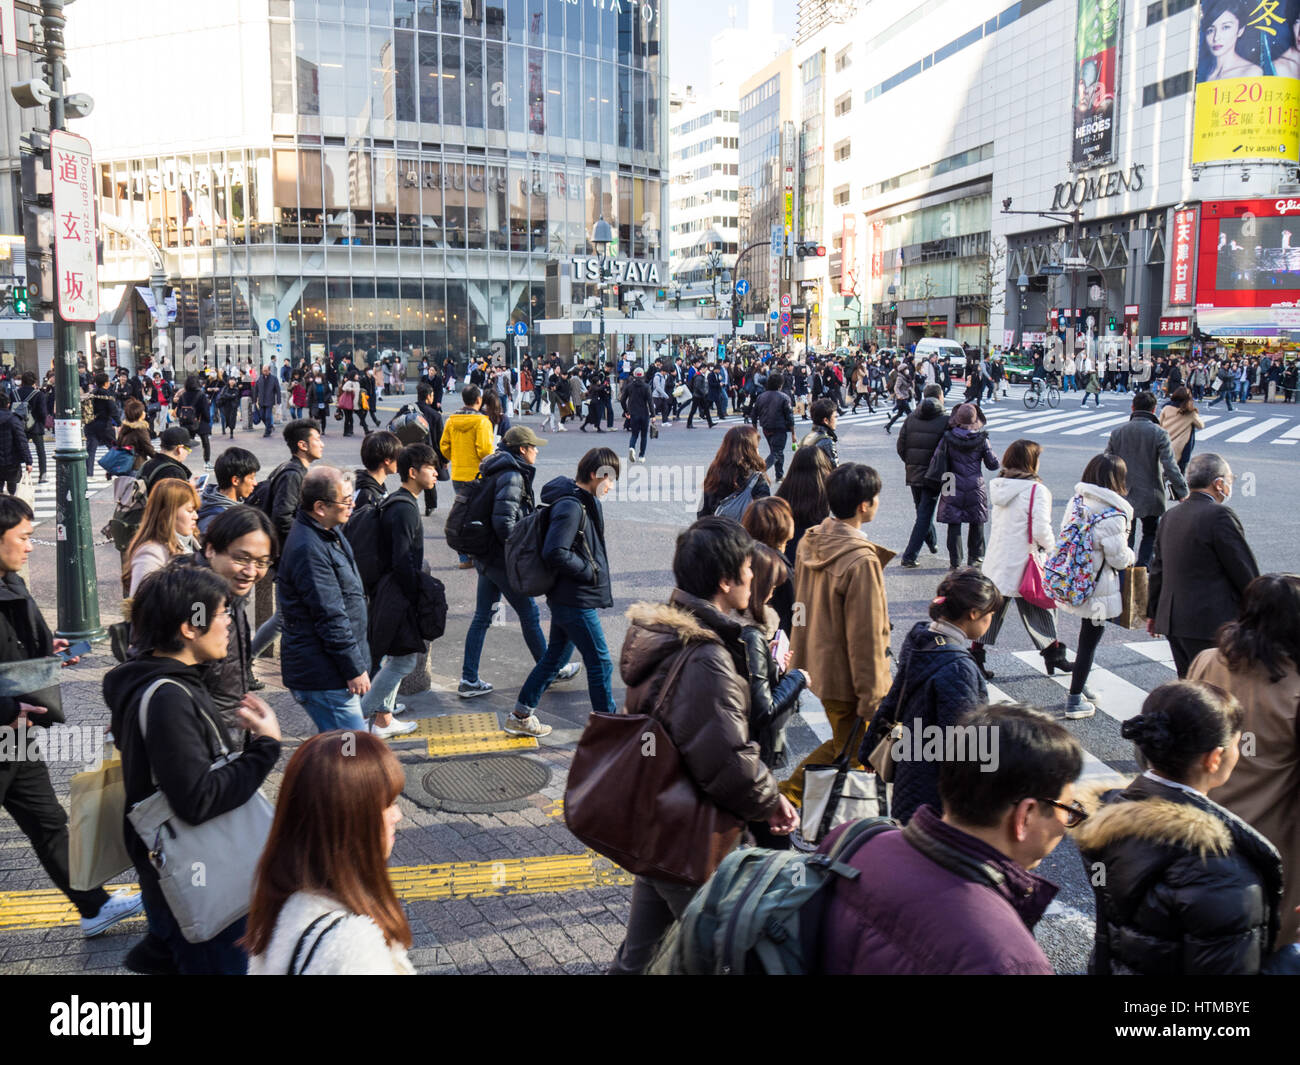 Shibuya crossing, allegedly the word's busiest intersection outside of Shibuya Station, Tokyo Japan. Stock Photo